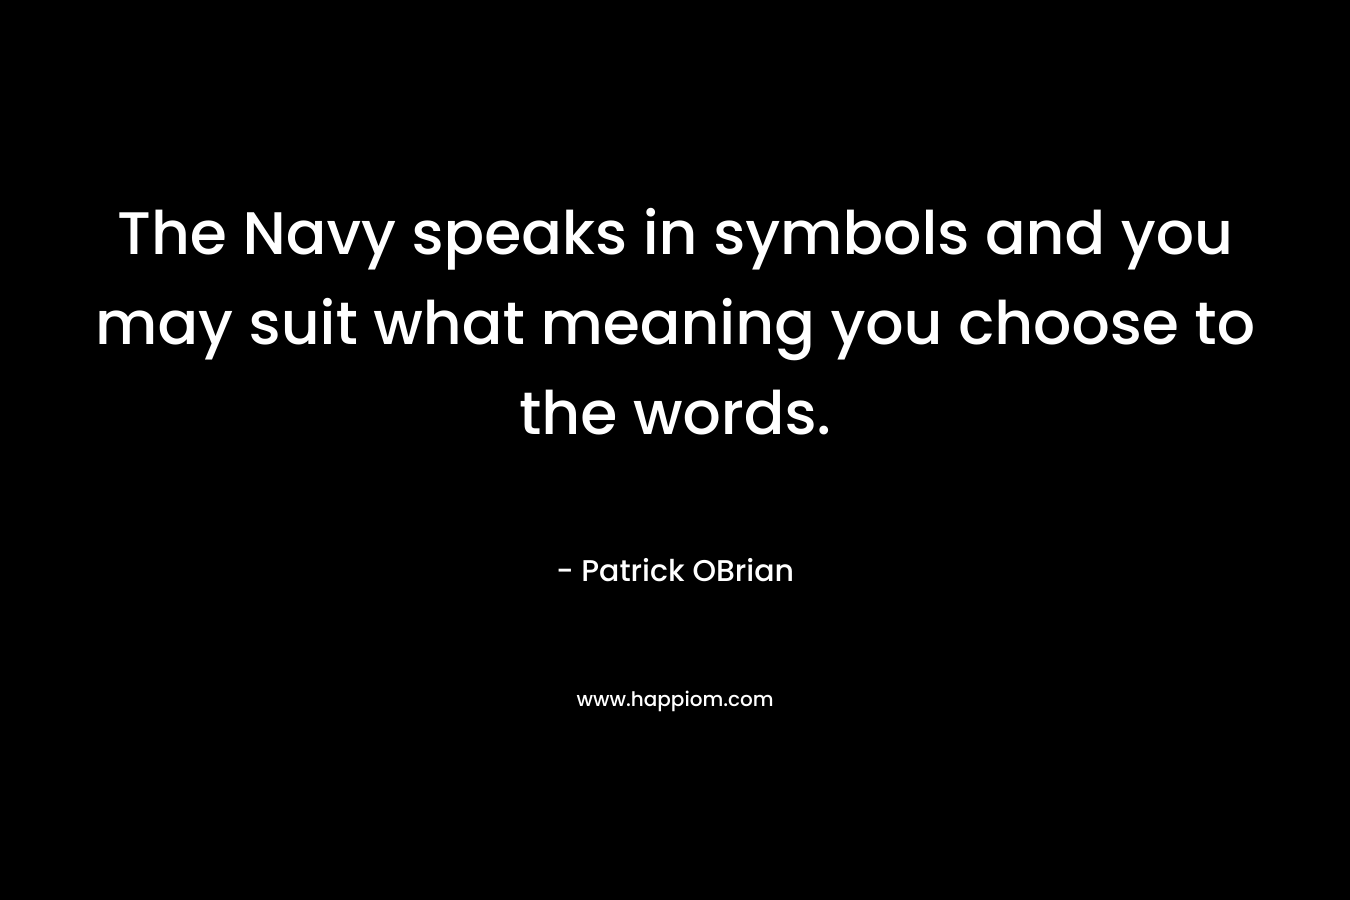 The Navy speaks in symbols and you may suit what meaning you choose to the words. – Patrick OBrian